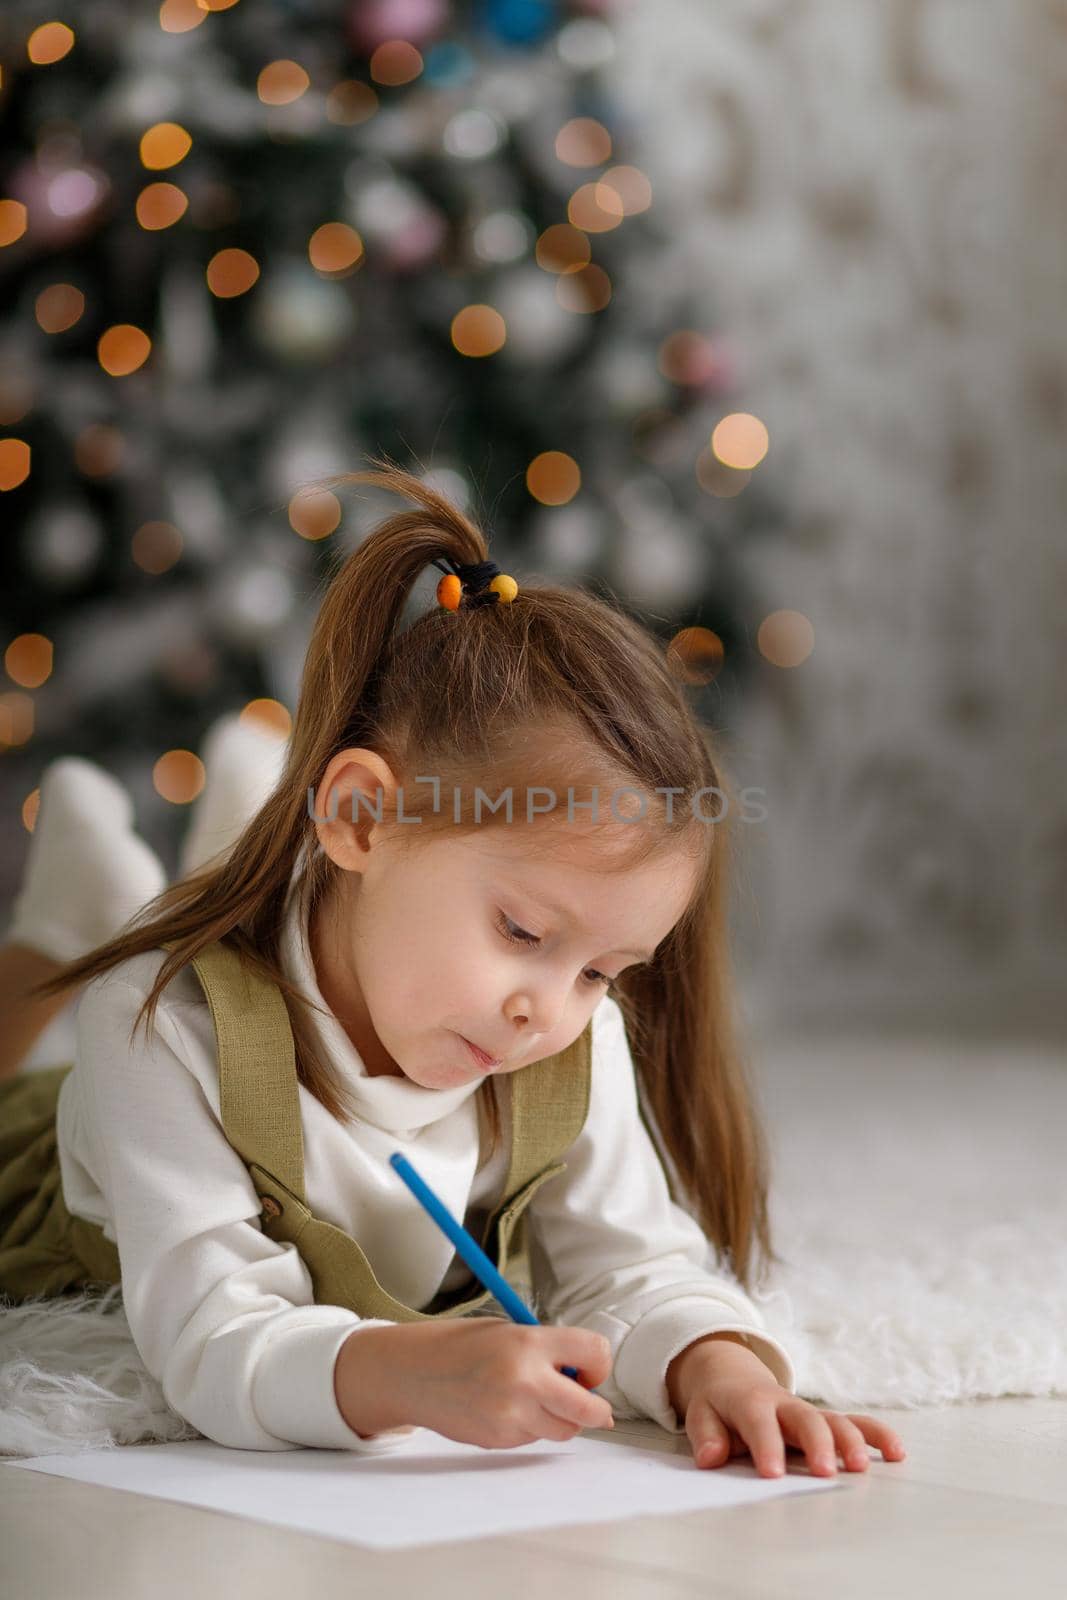 Cute little girl with ponytails is writing a letter to santa claus, vertical copy space.